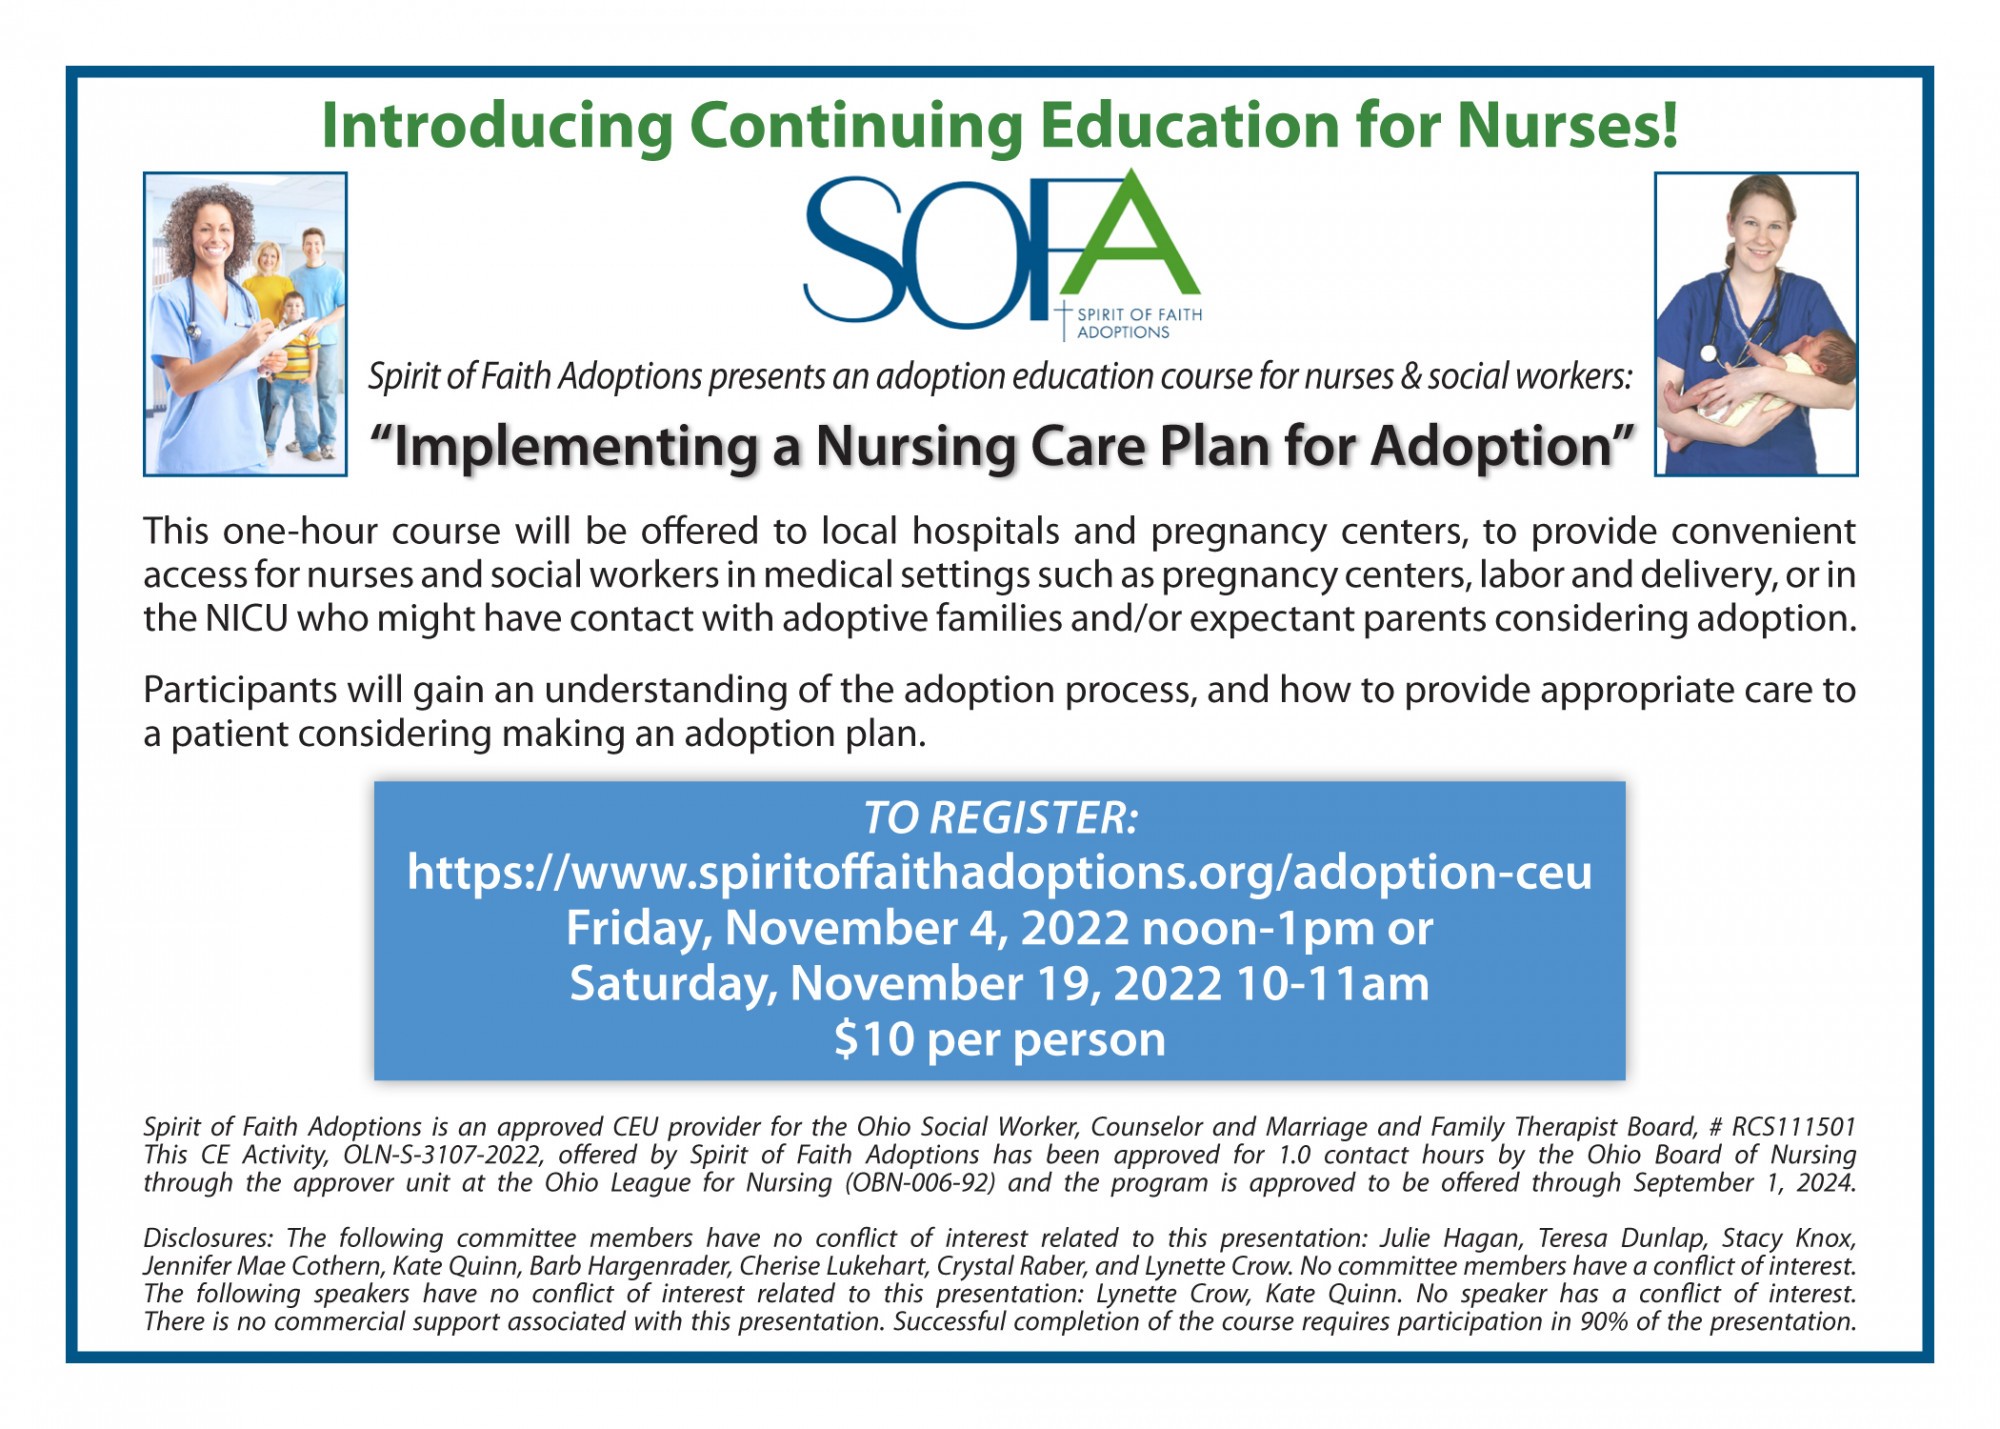 Implementing a Nursing Care for Adoption Course 